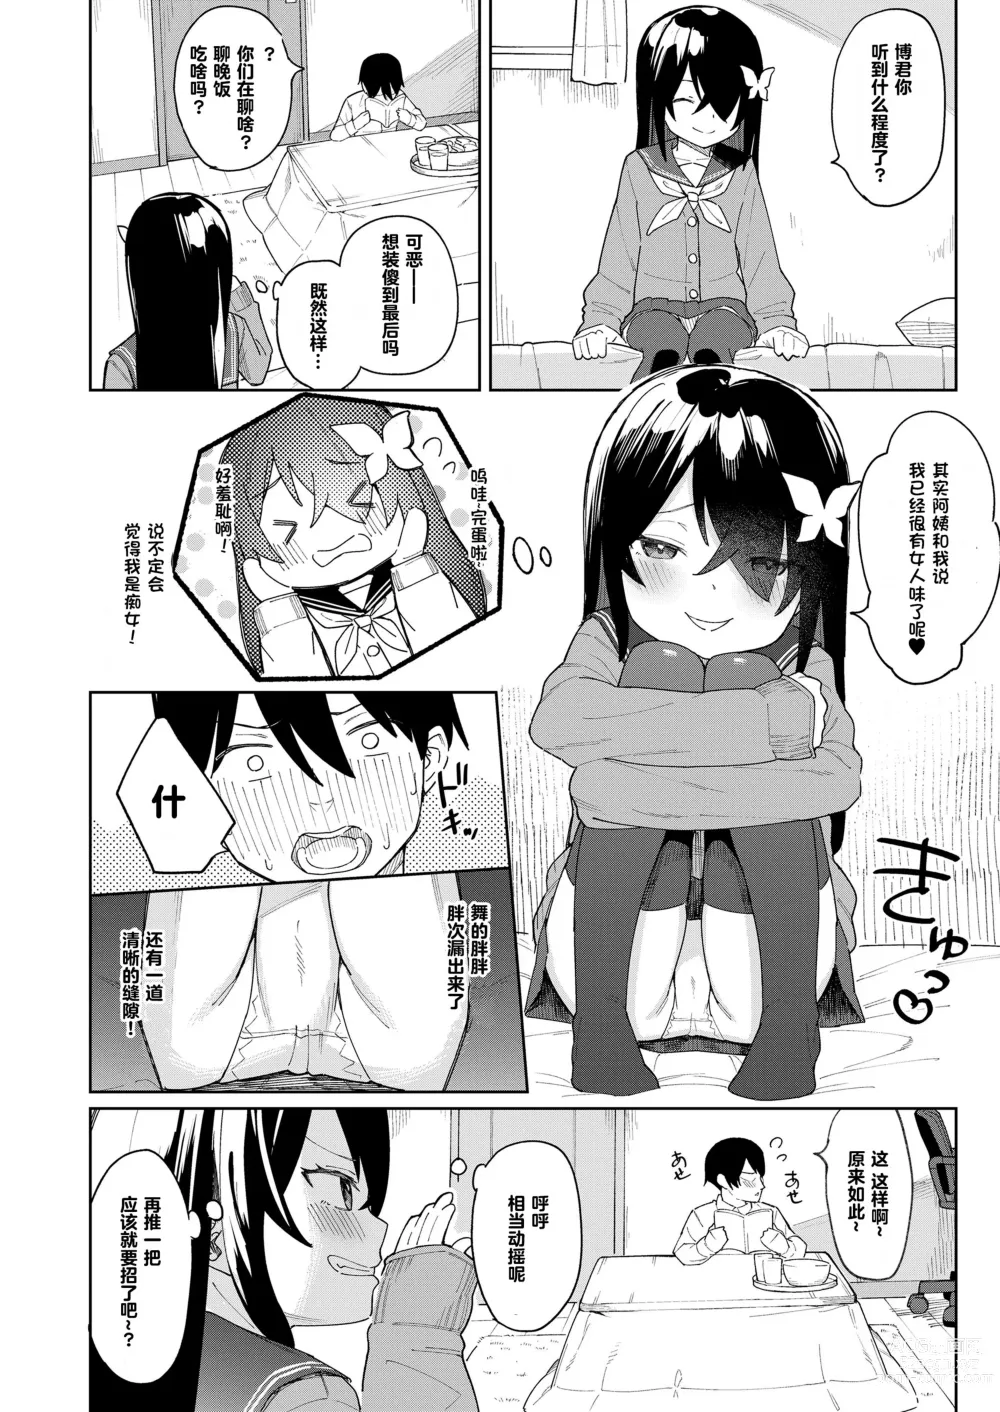 Page 5 of doujinshi My childhood friend is small